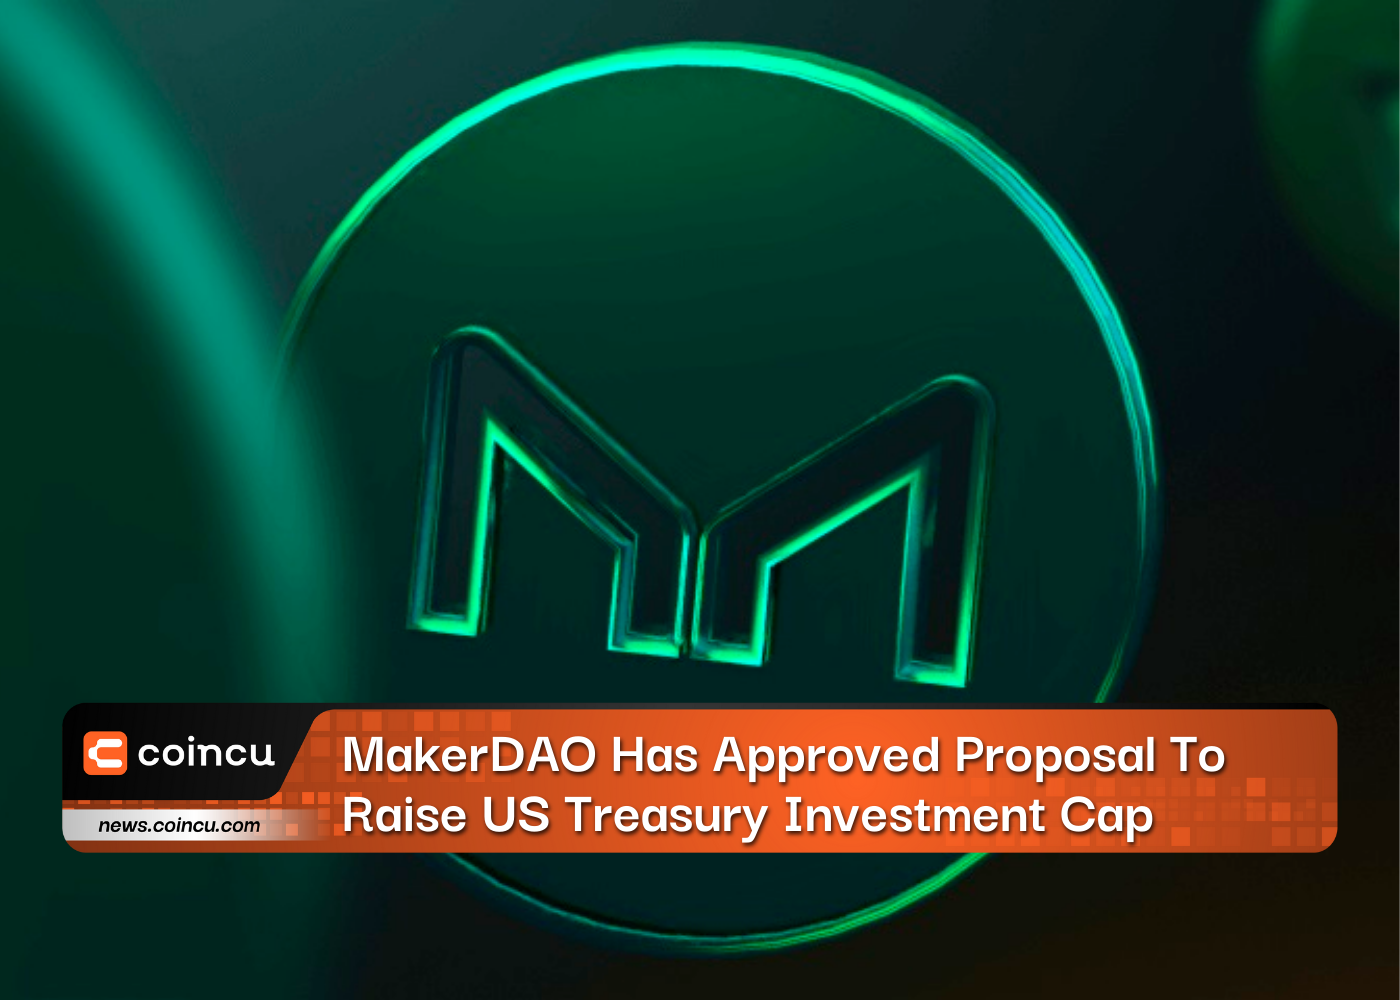 MakerDAO Has Approved Proposal To Raise US Treasury Investment Cap